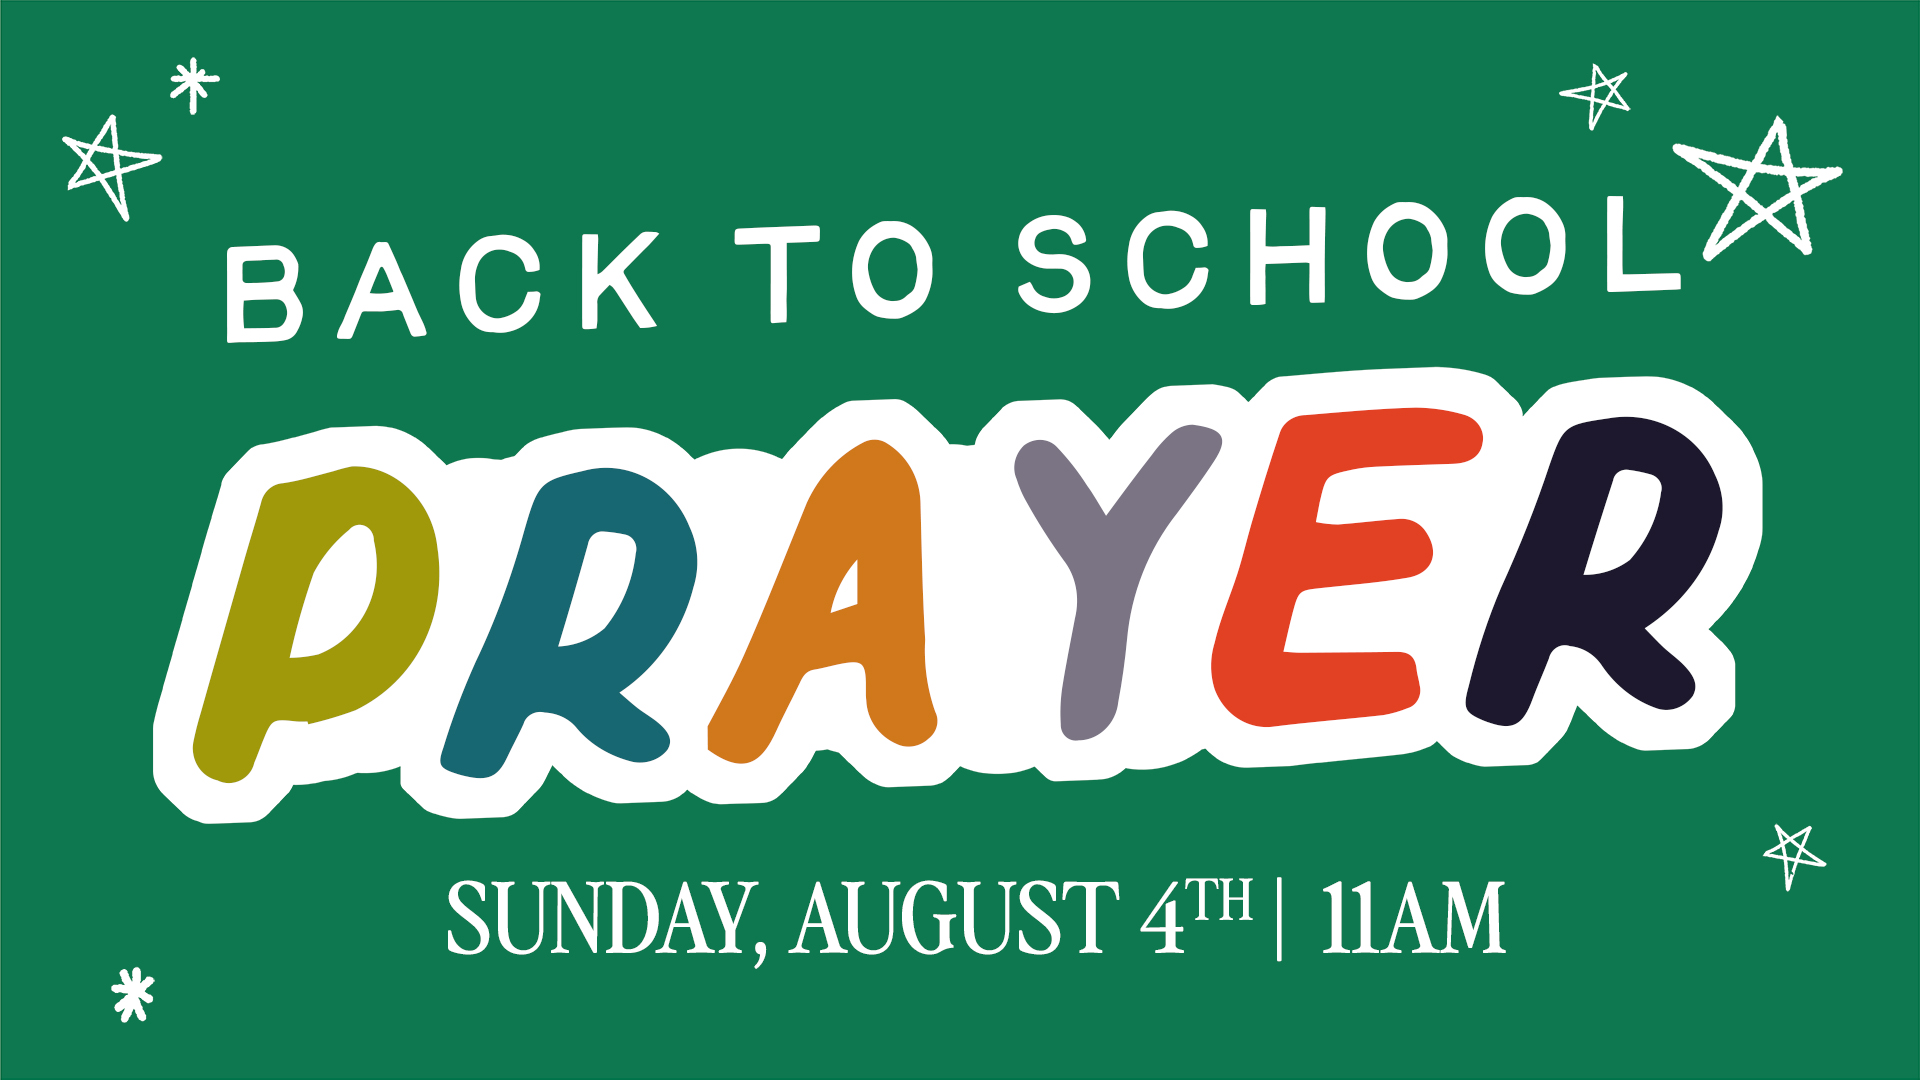 Back to School Prayer at the Spartanburg campus